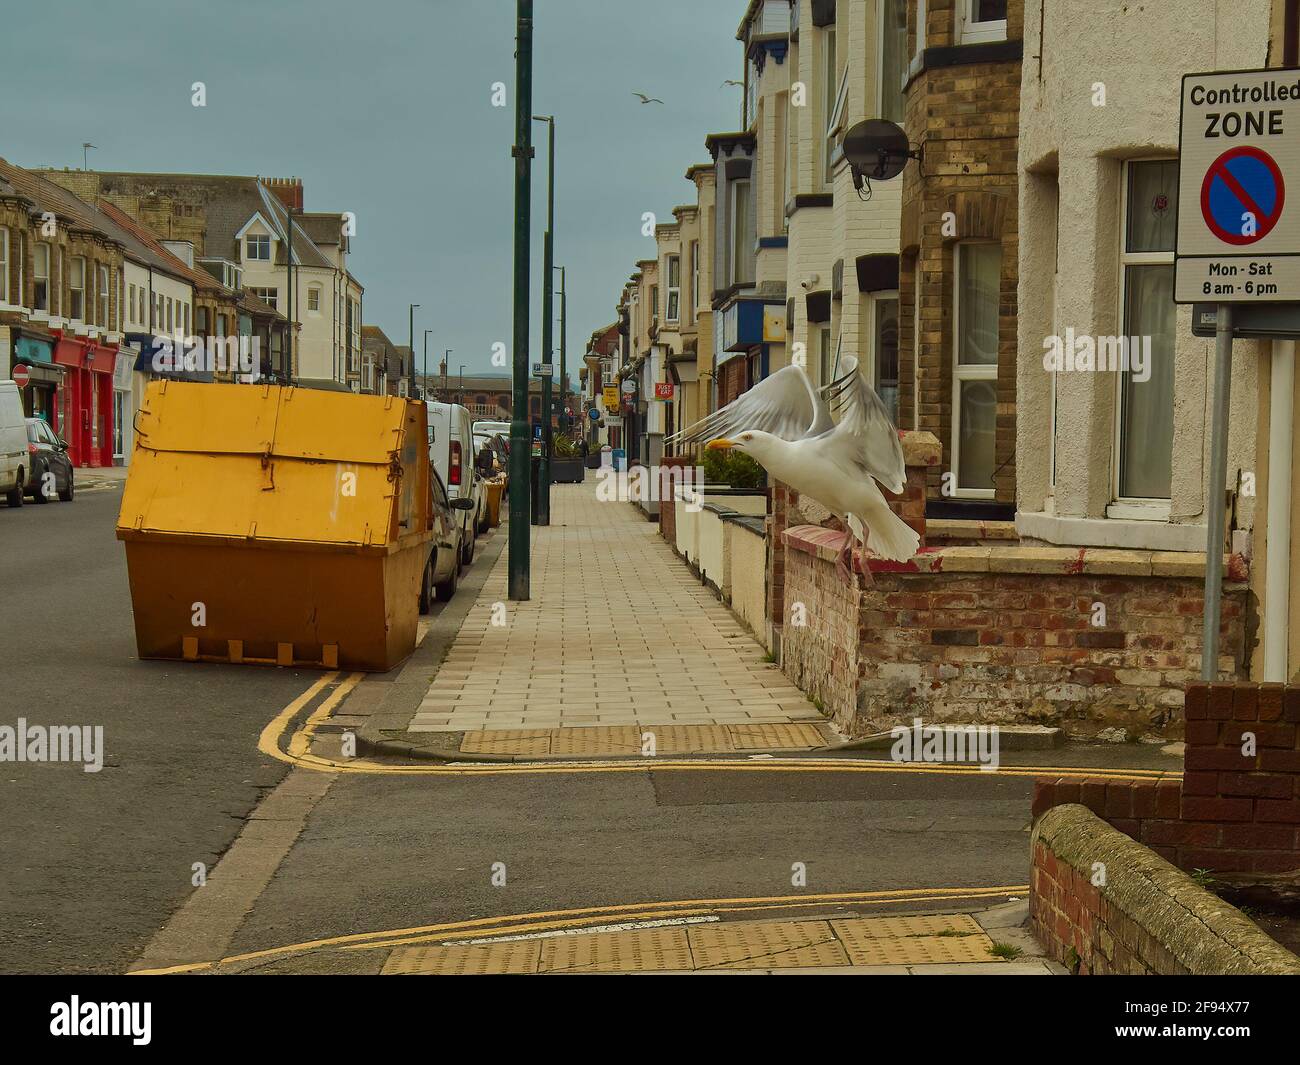 Redcar UK, Jun 2019 - An imposing herring gull strains into the air on a residential street in one of Britain’s post-industrial coastal towns. Stock Photo